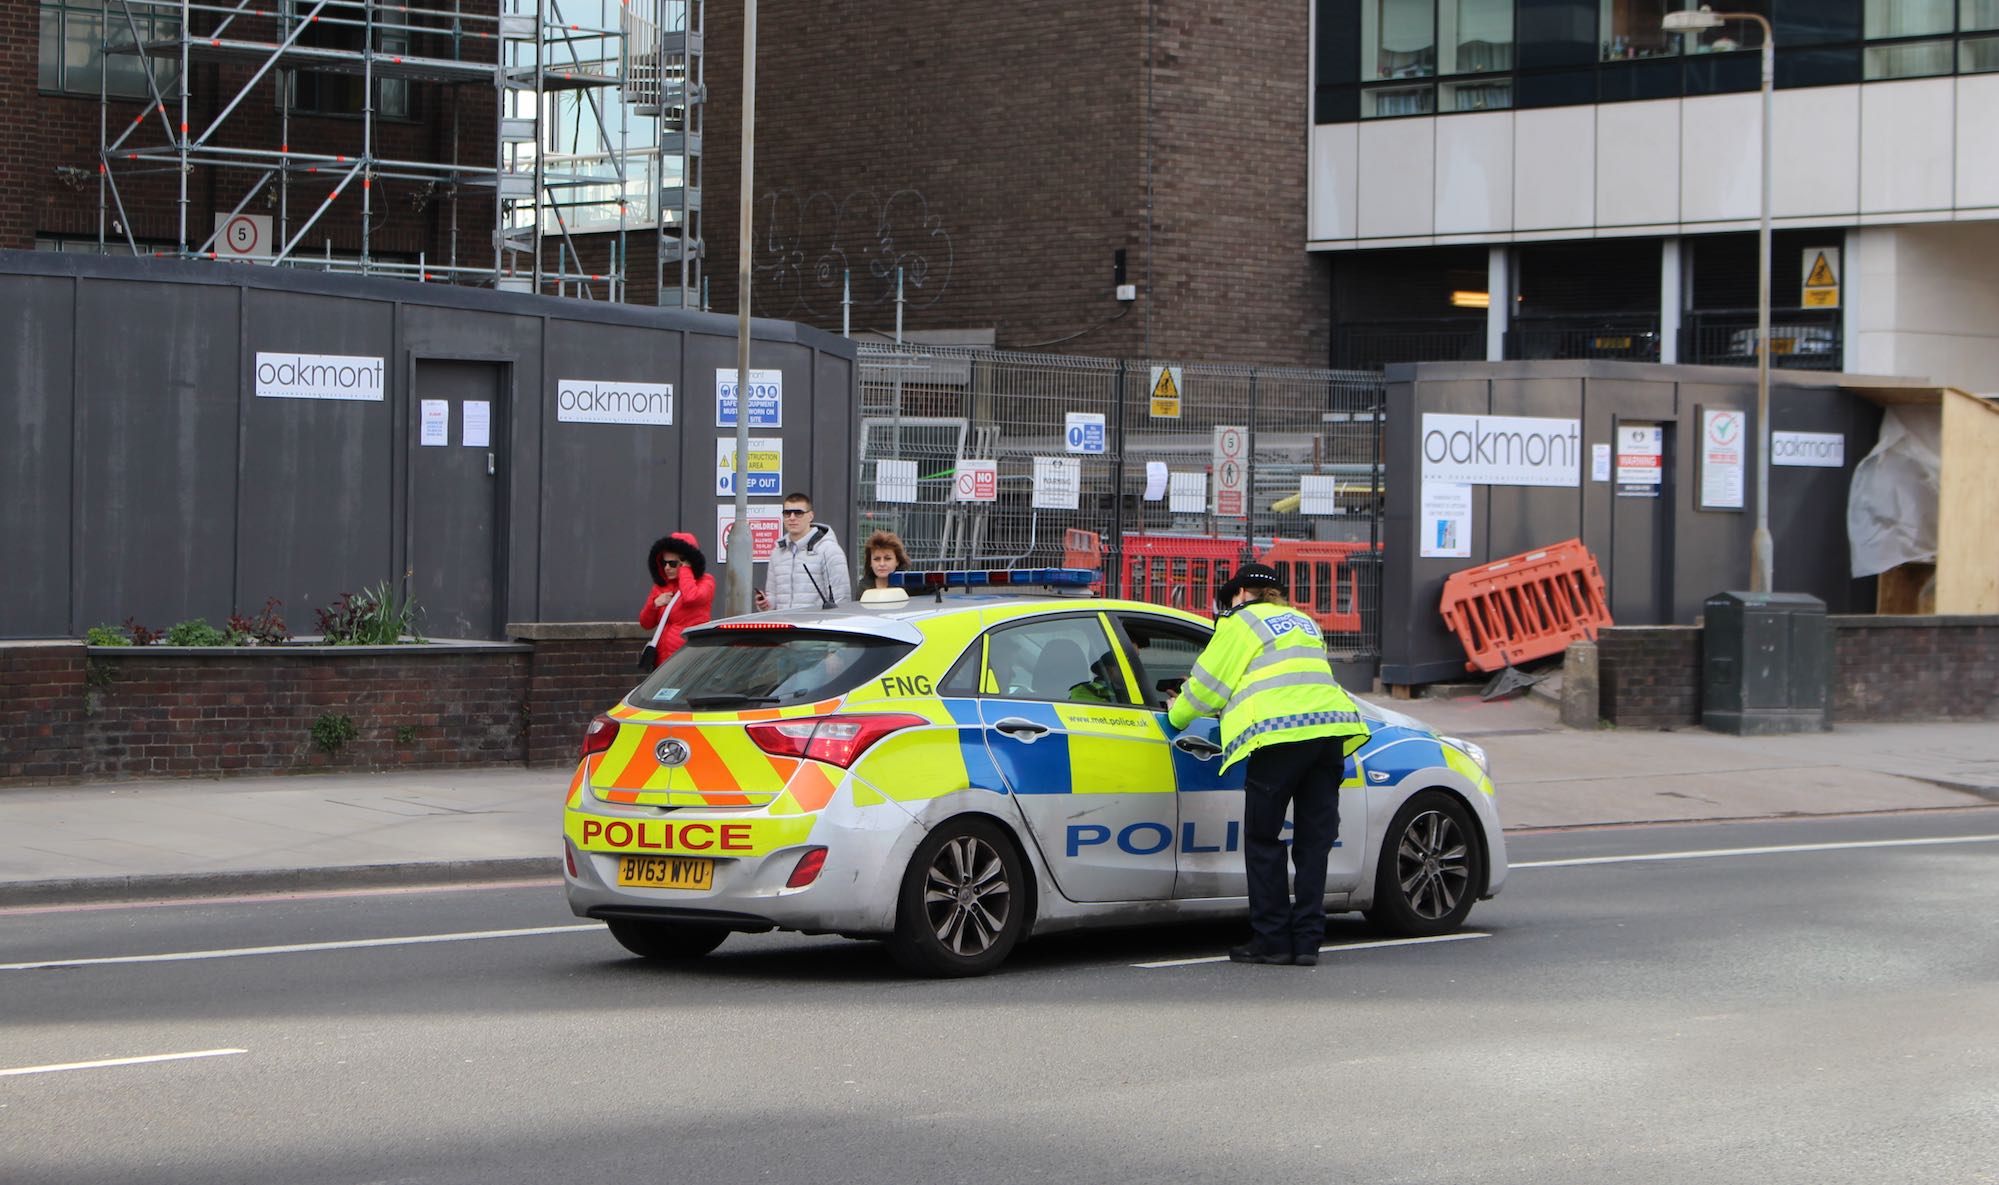 Lambeth politicians call for Met Police's borough merger plans to be dropped - MayorWatch